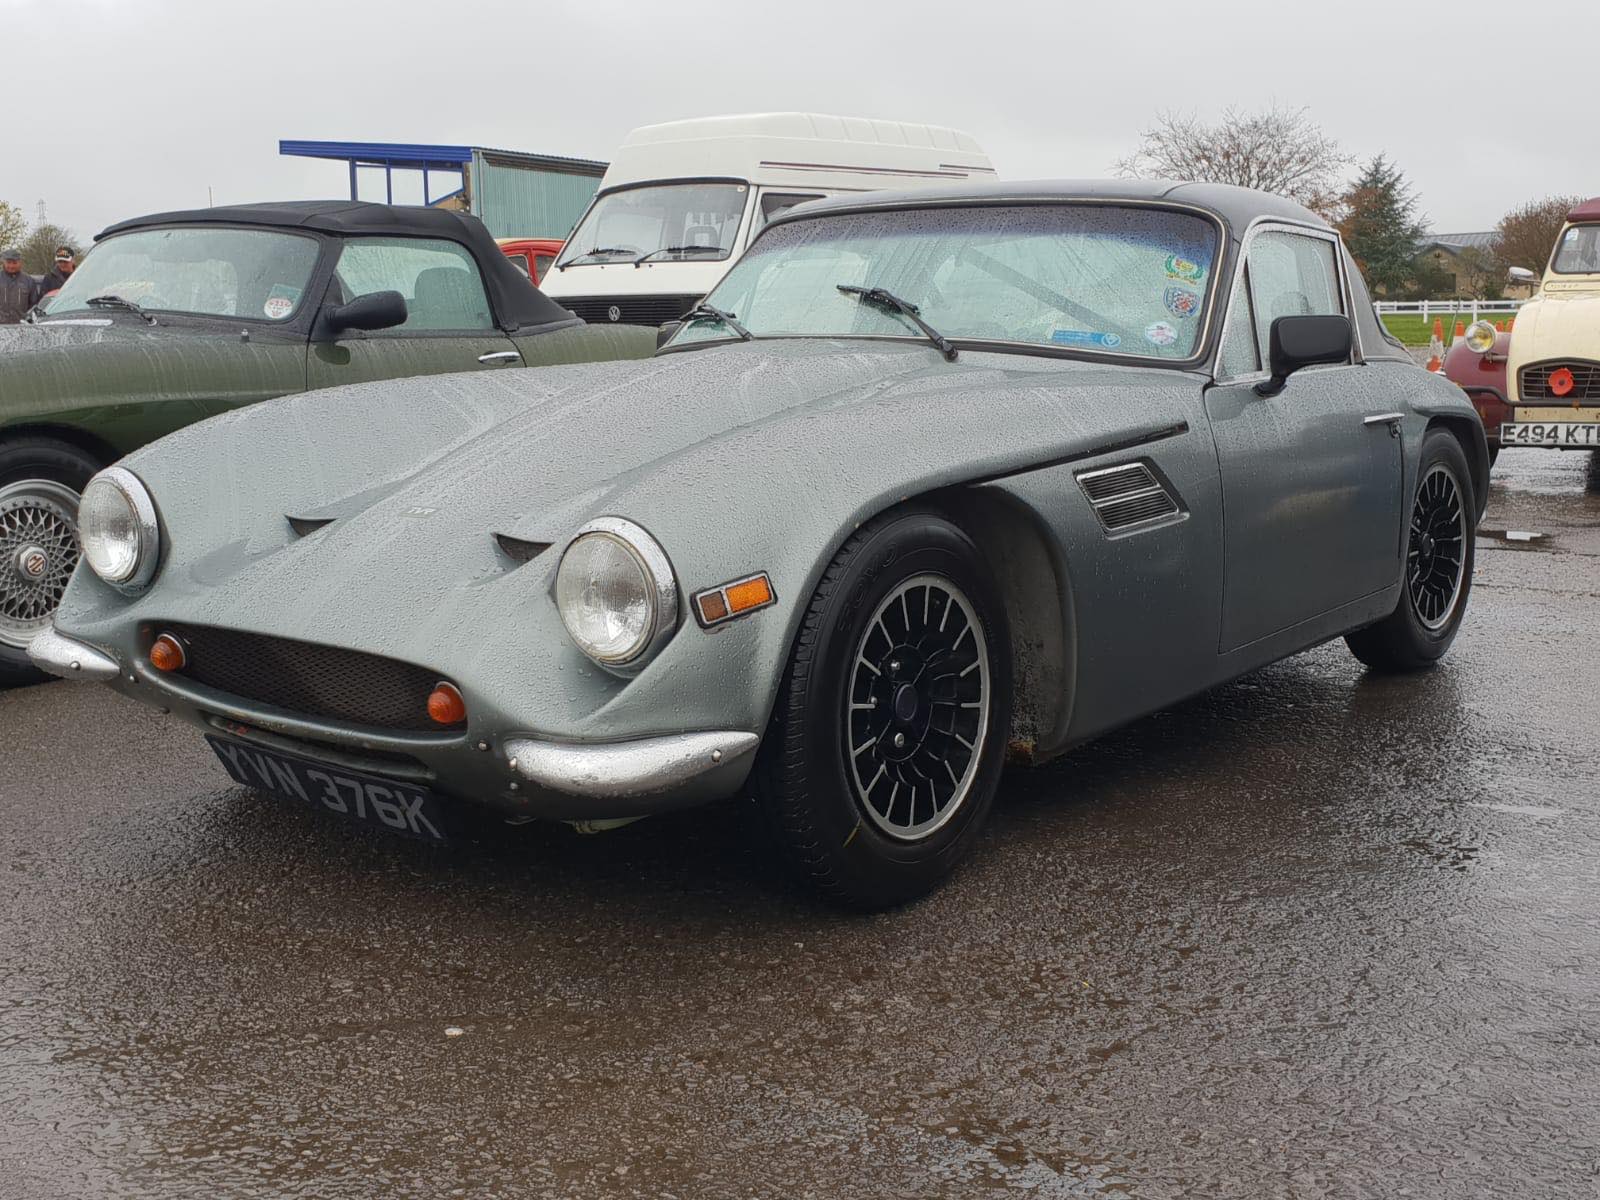 Silver TVR